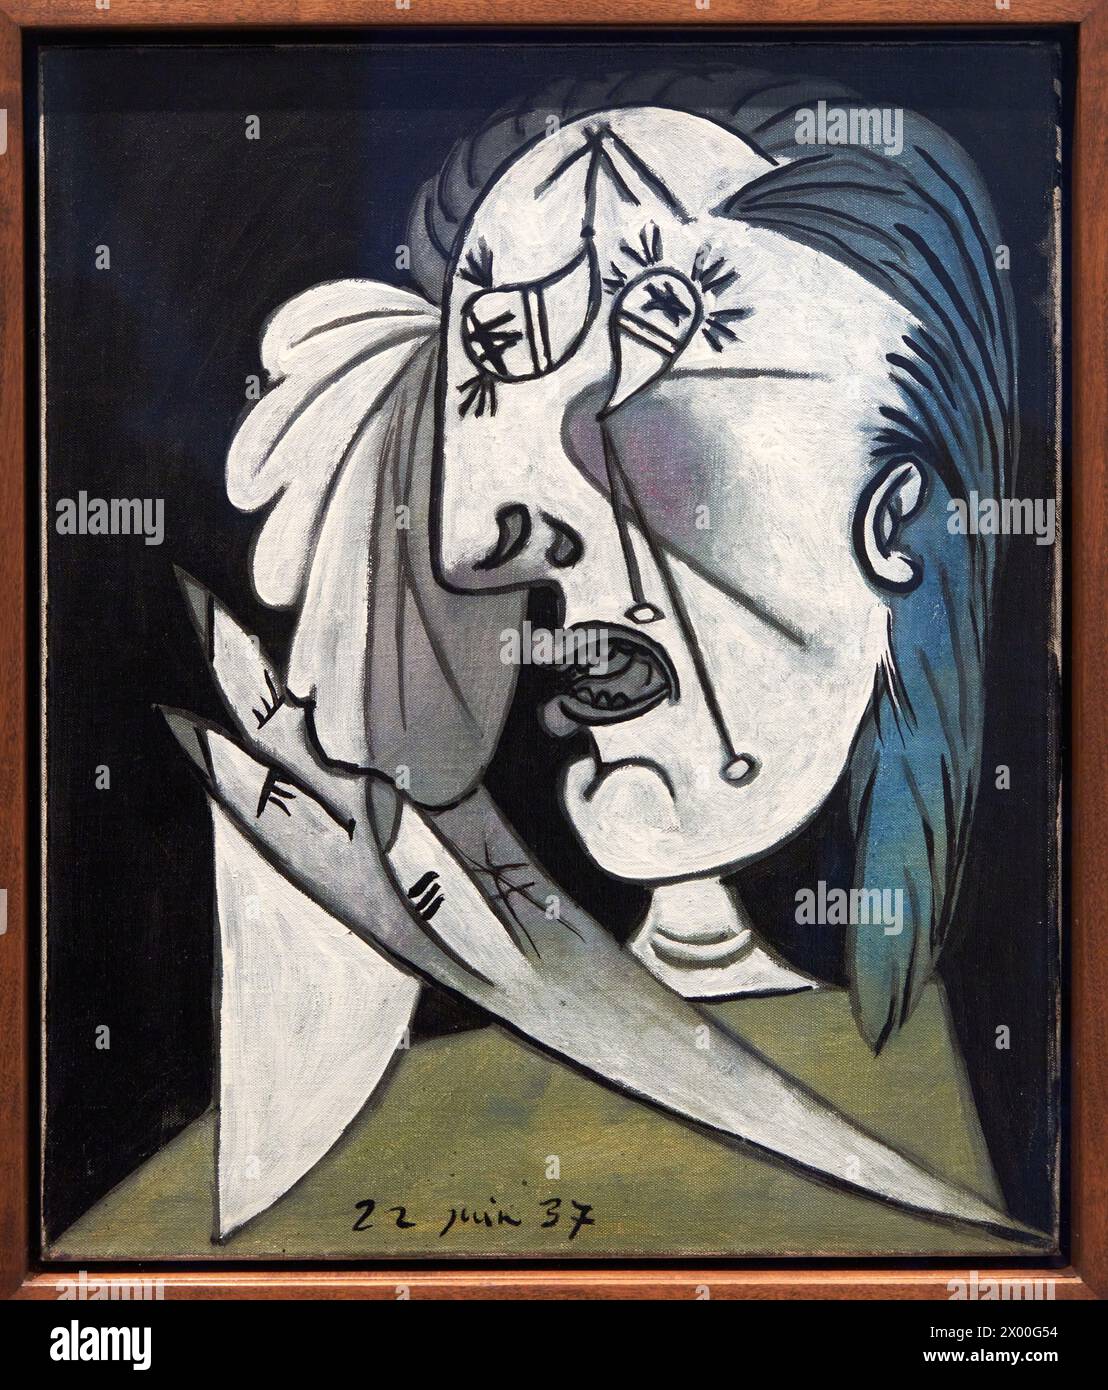 Weeping Woman's Head with. Handkerchief, Postcript for 'Guernica'. 1937, Pablo Picasso, Reina Sofia Museum, Madrid, Spain, Europe. Stock Photo